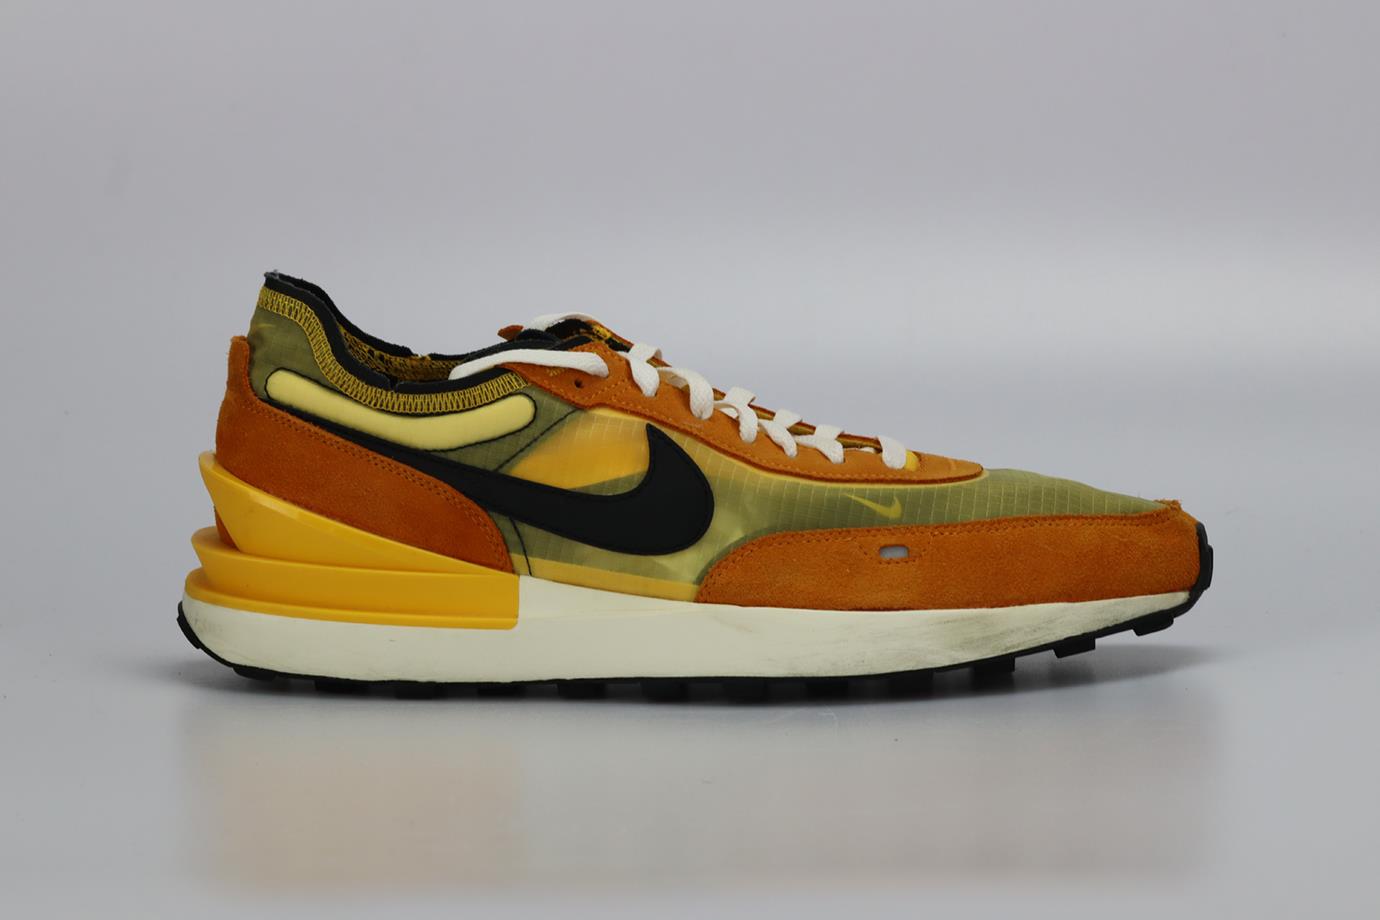 NIKE MEN'S WAFFLE ONE SE UNIVERSITY GOLD MESH AND SUEDE SNEAKERS EU 47.5 UK 12 US 13